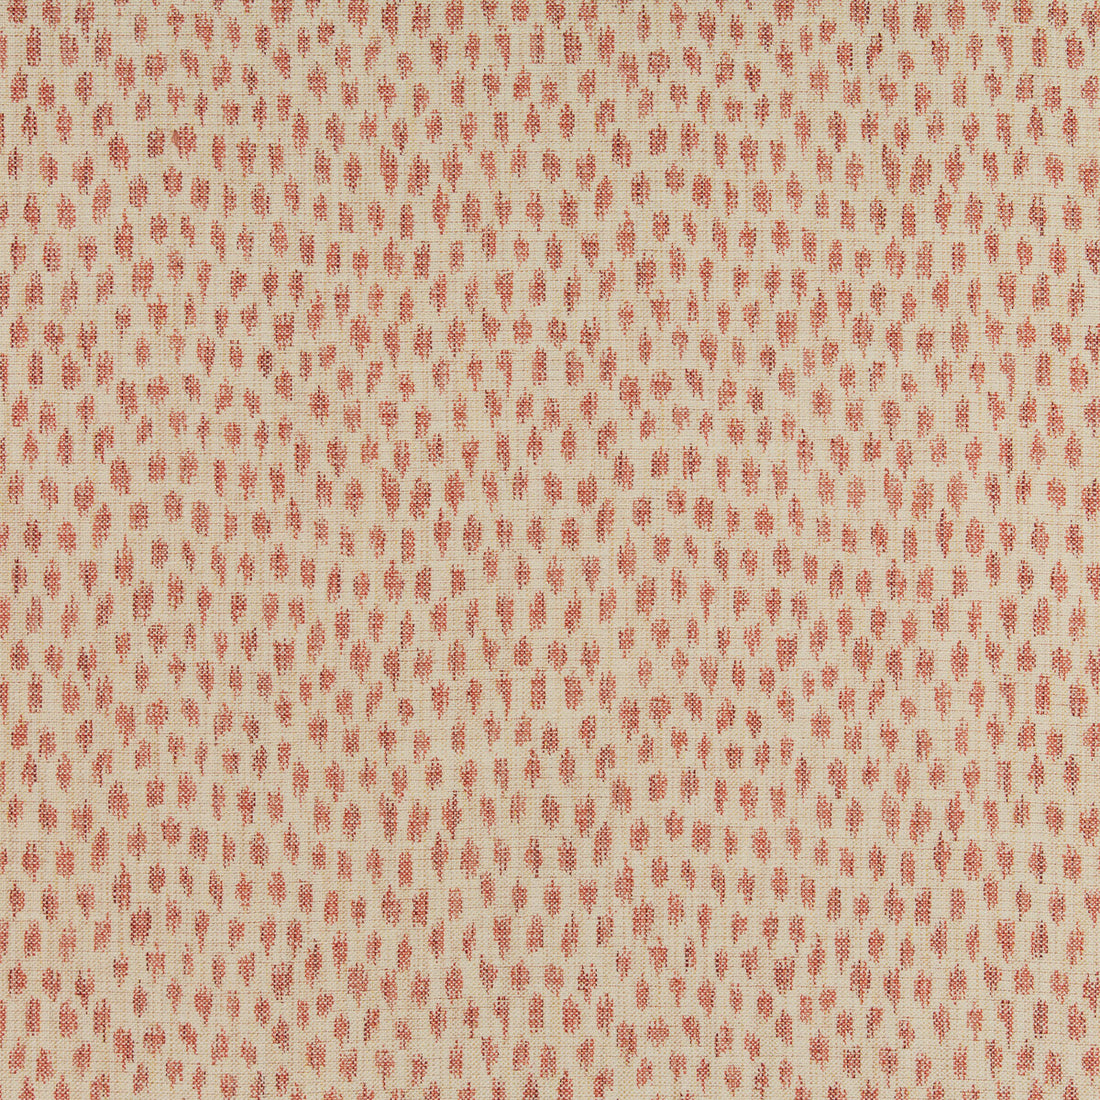 Kemble fabric in rouge color - pattern BFC-3683.19.0 - by Lee Jofa in the Blithfield collection